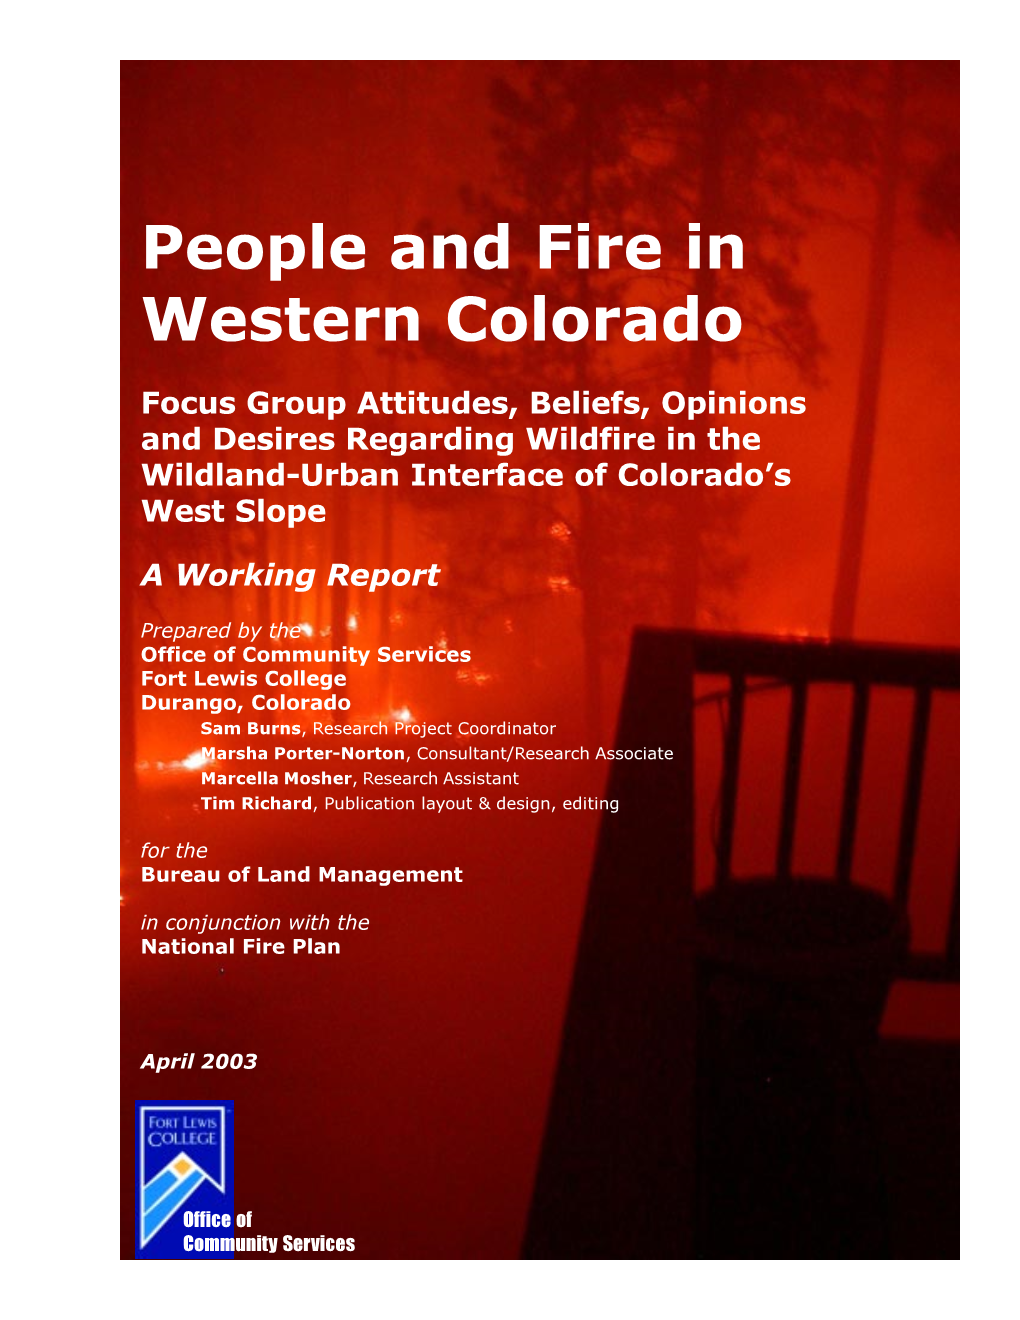 People and Fire in Western Colorado